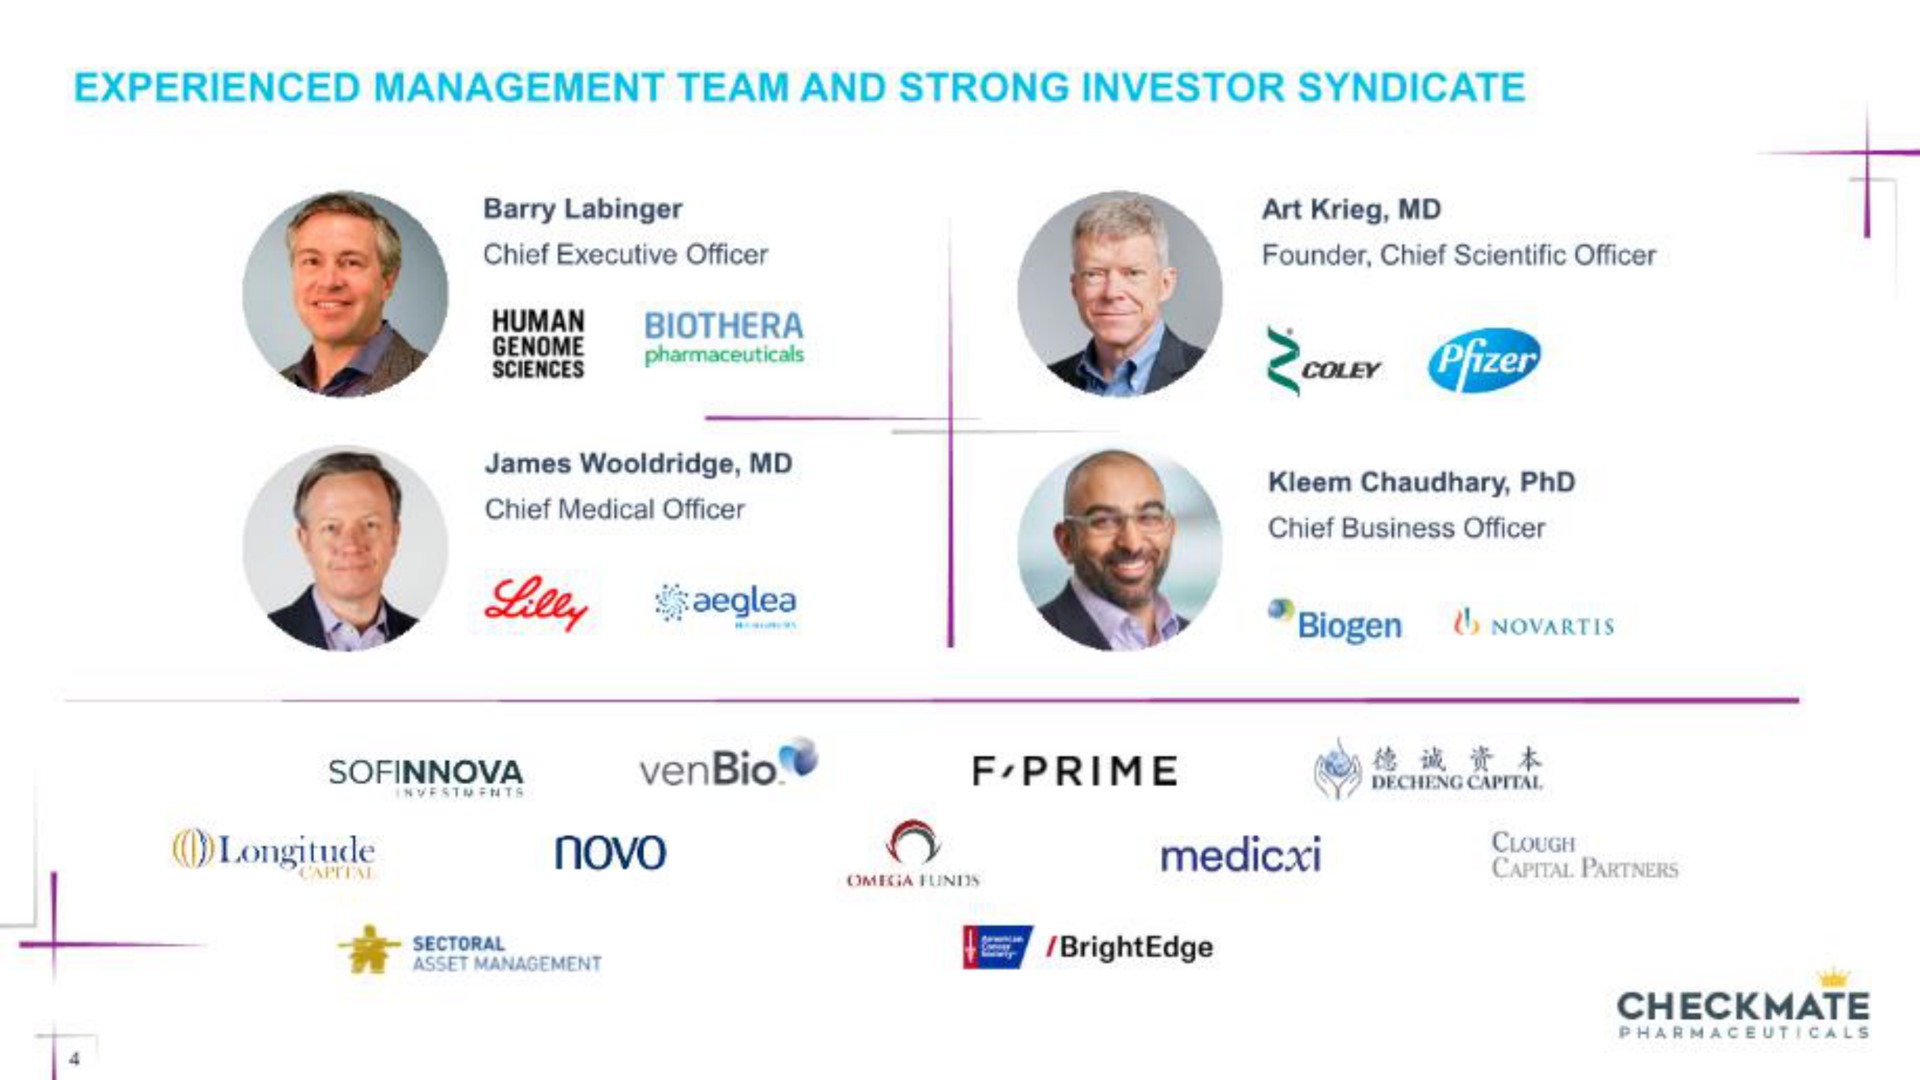 experienced management team and strong investor syndicate lilt lea biogen sciences up prime longitude capital partners checkmate | Checkmate Pharmaceuticals